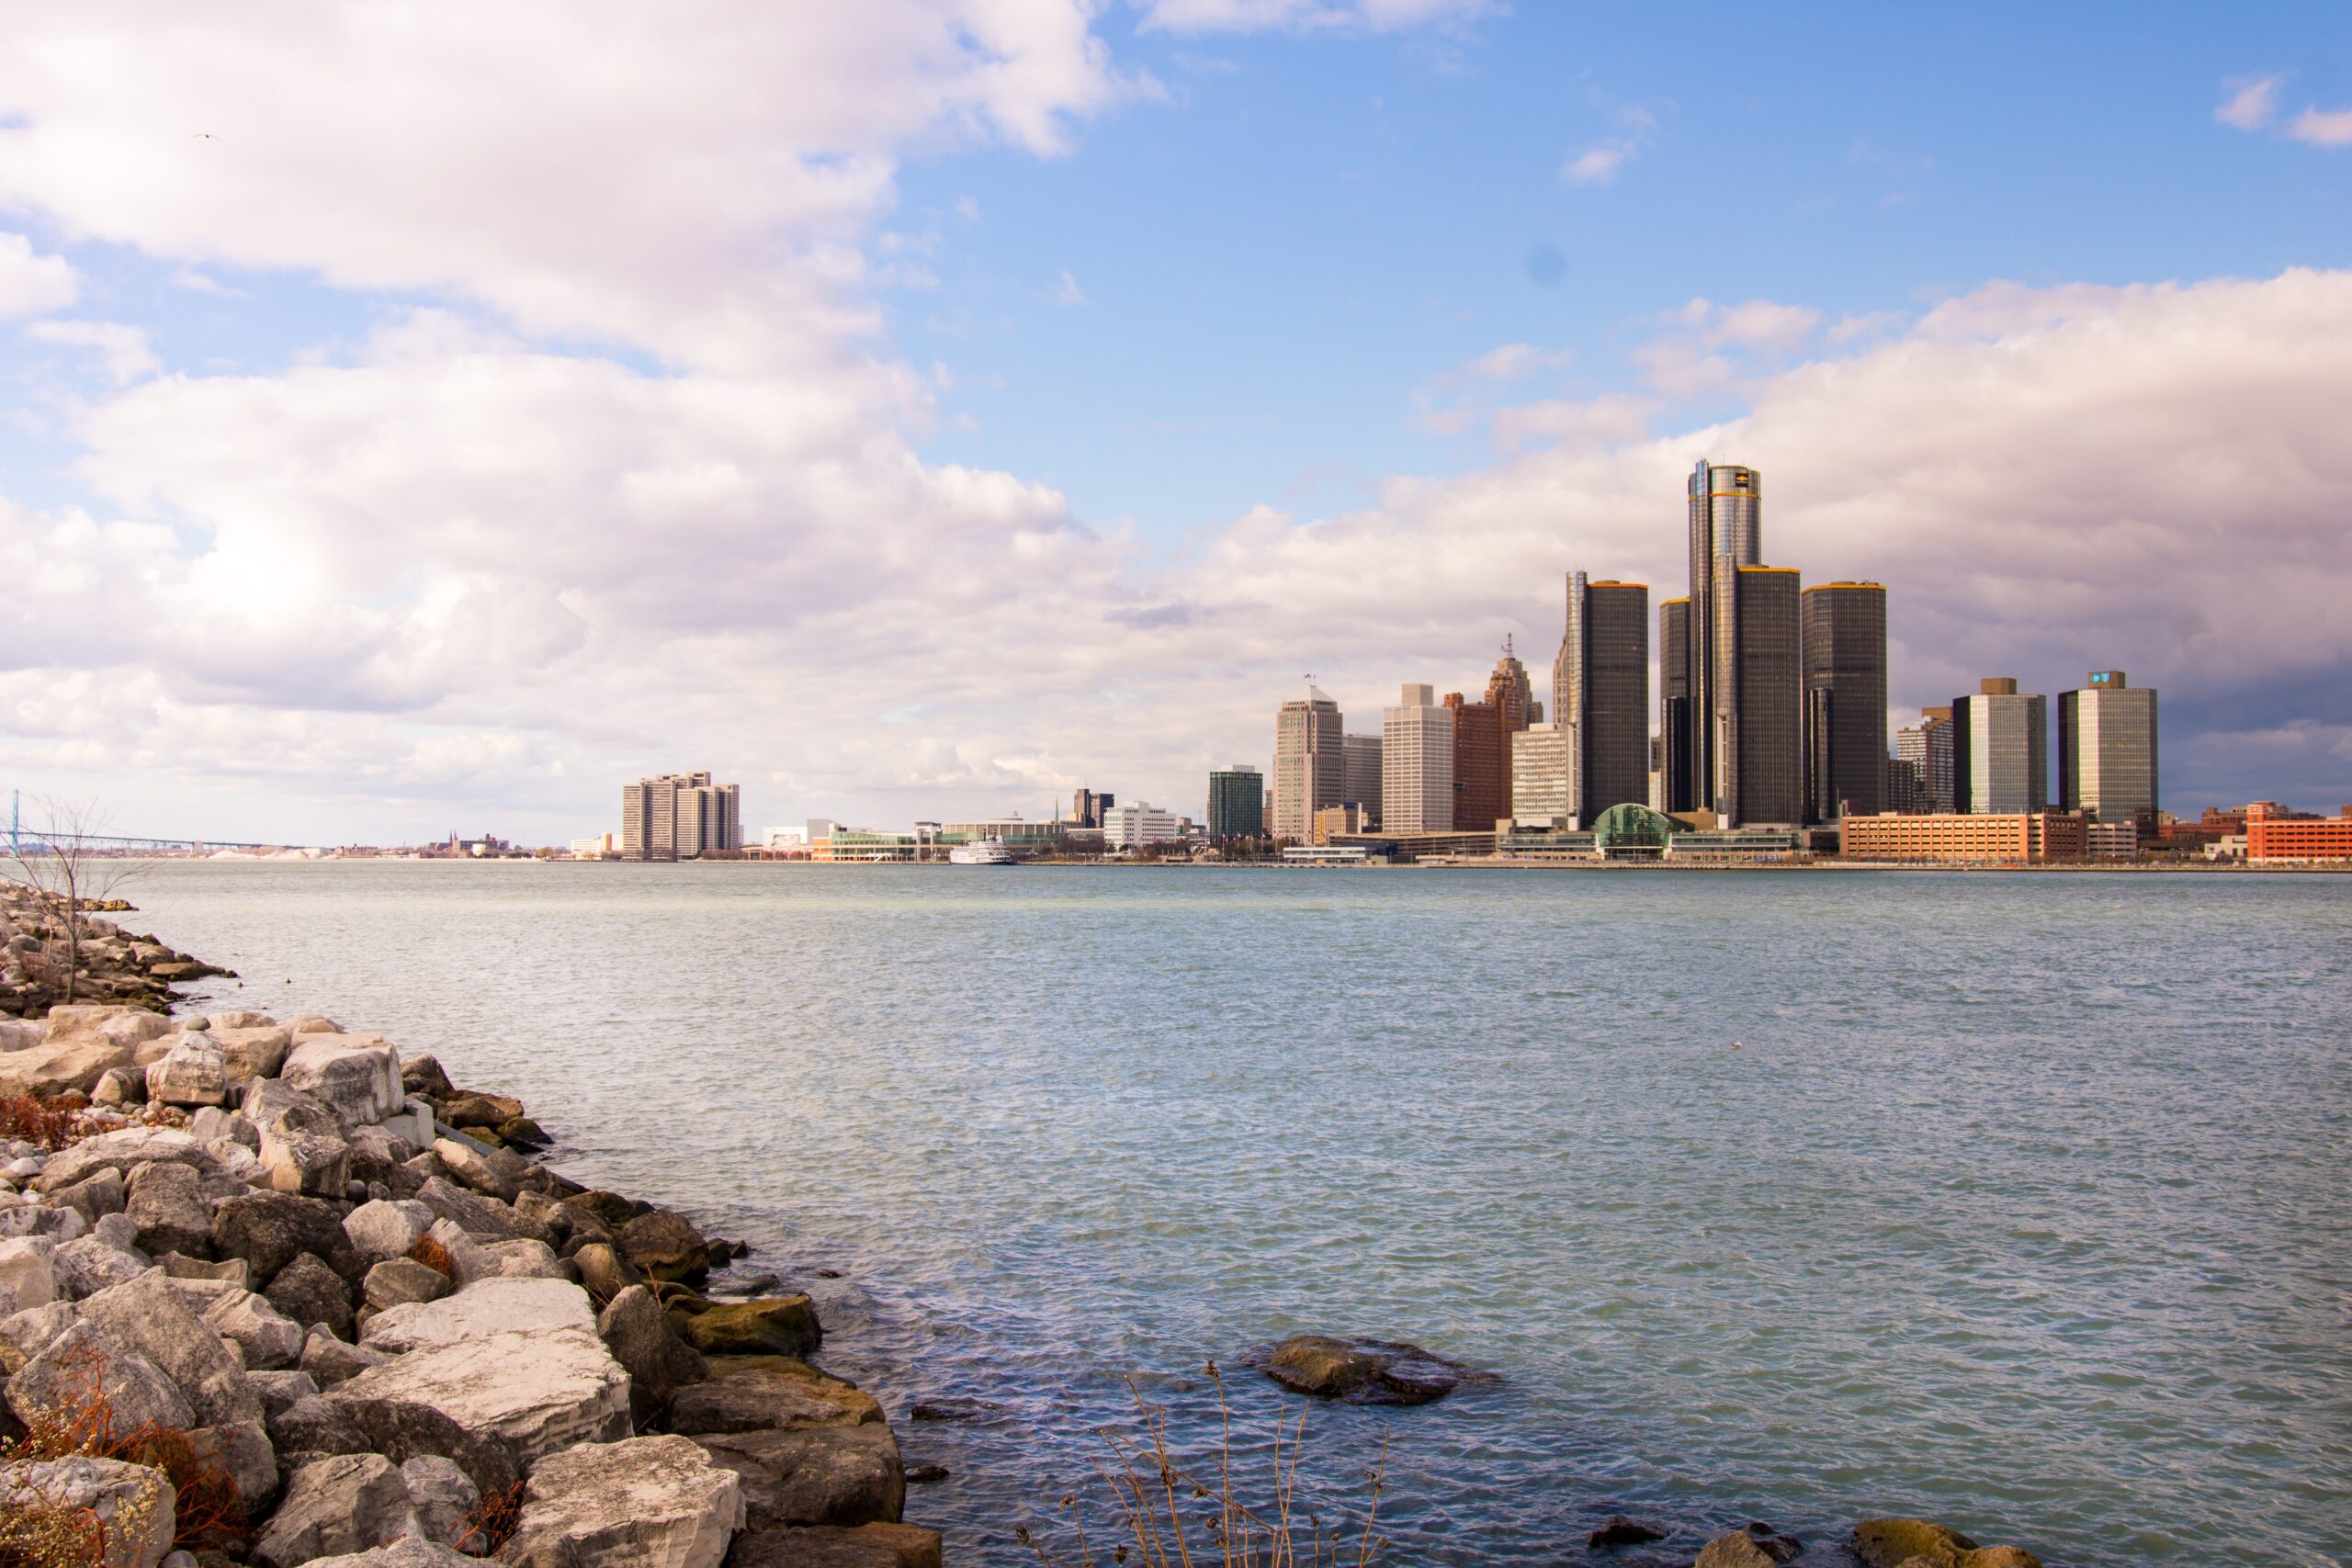 looking across a lake at tall buildings in Detroit, Michigan